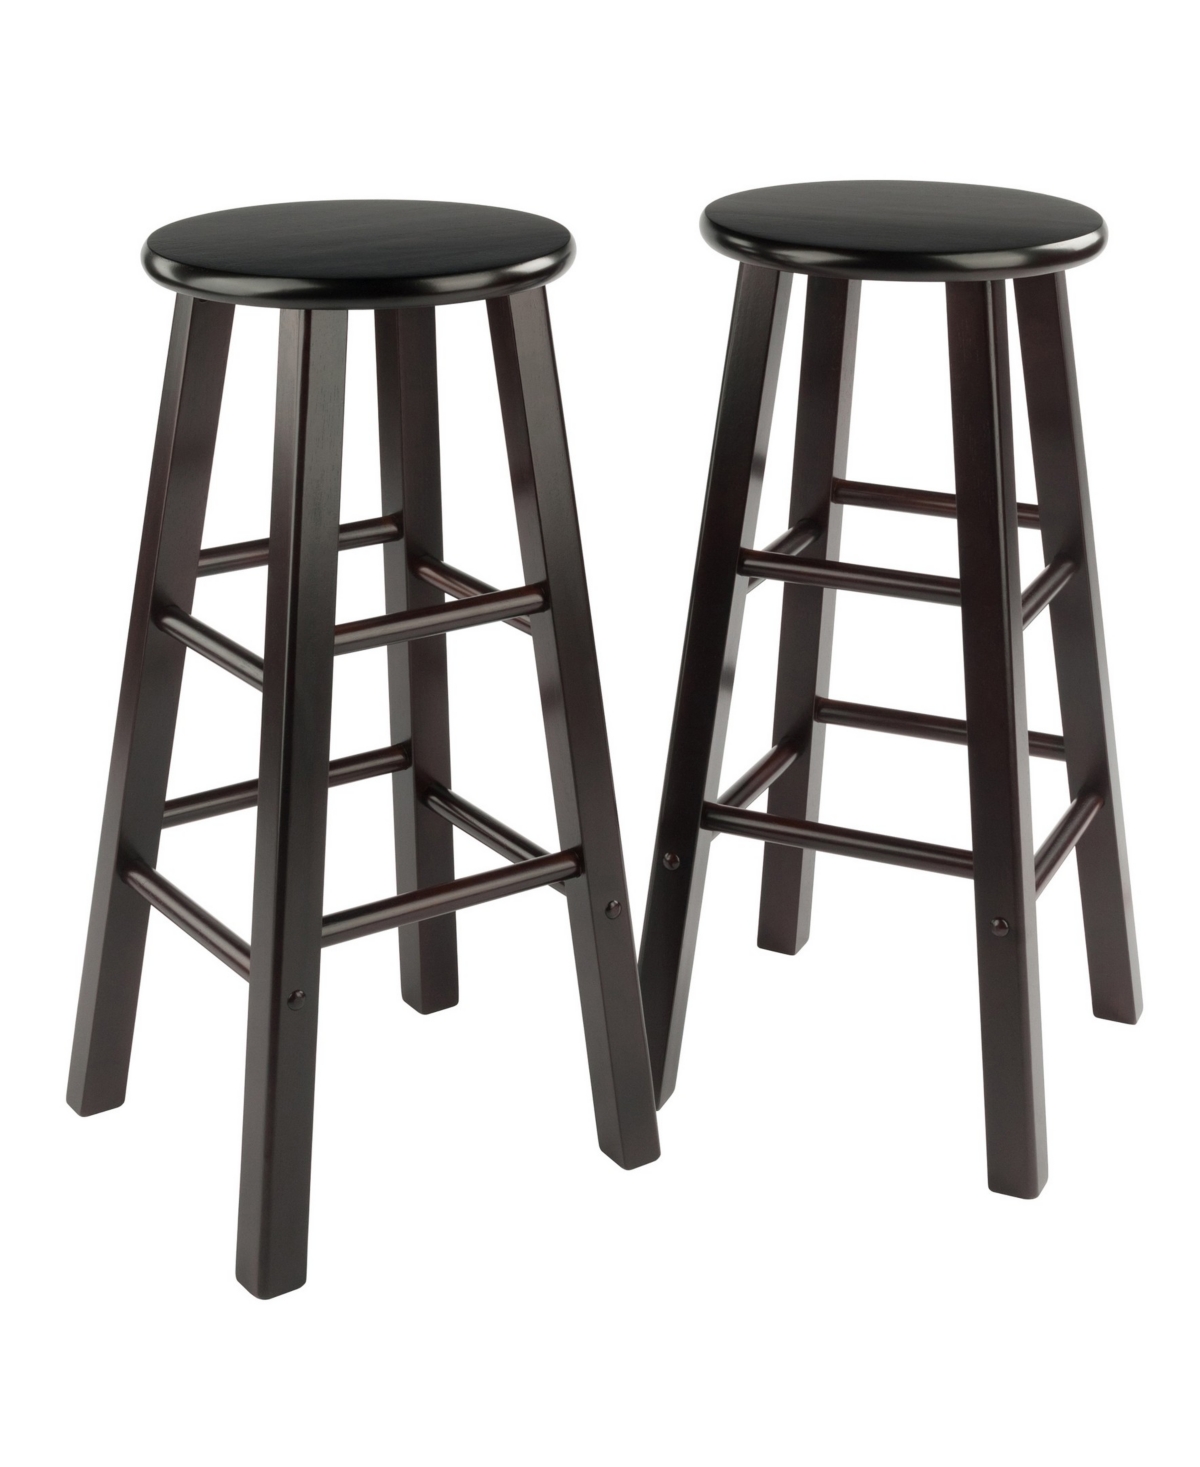 Winsome Element 2 Piece Wood Bar Stool Set In Espresso